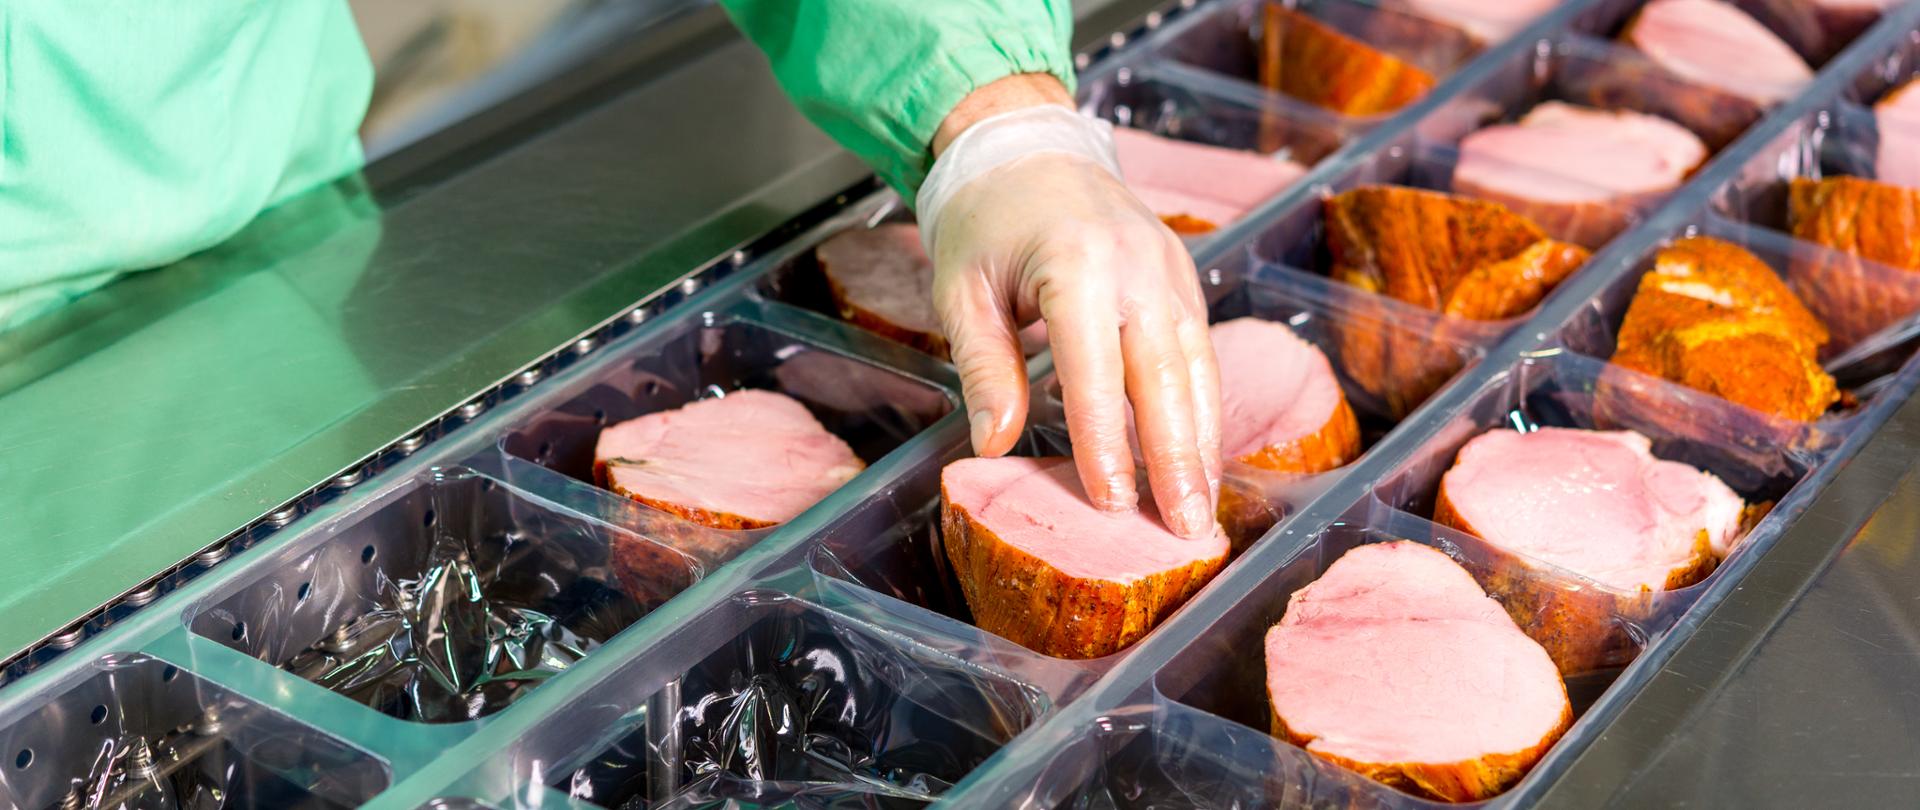 Several chunks of raw meat being processed packaged and shipped